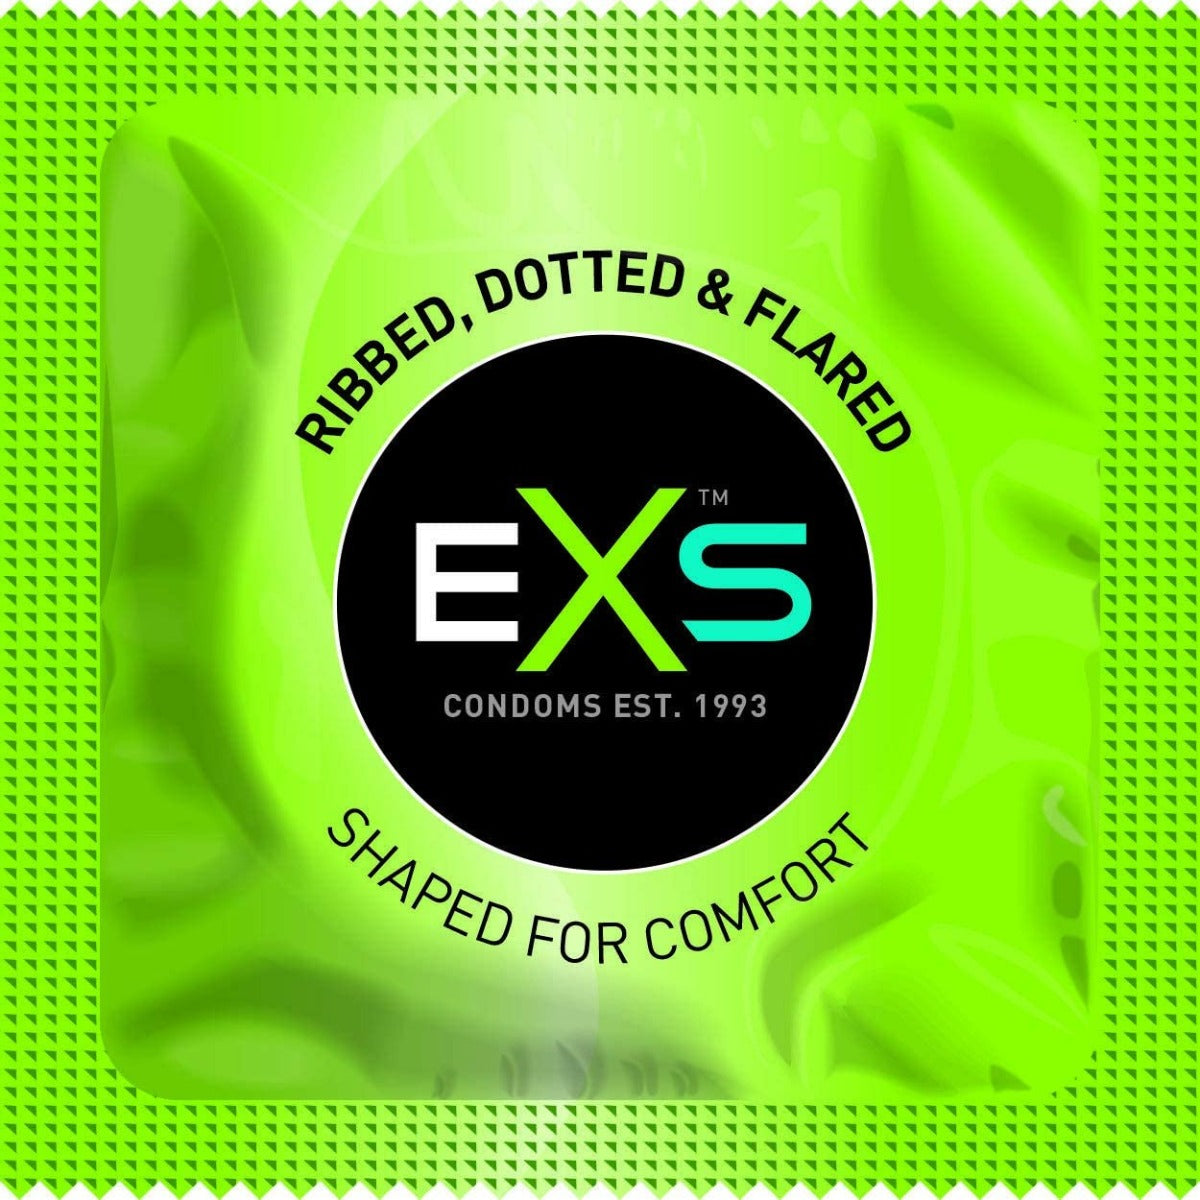 EXS | Ribbed and Dotted Comfy Fit - 12 pack